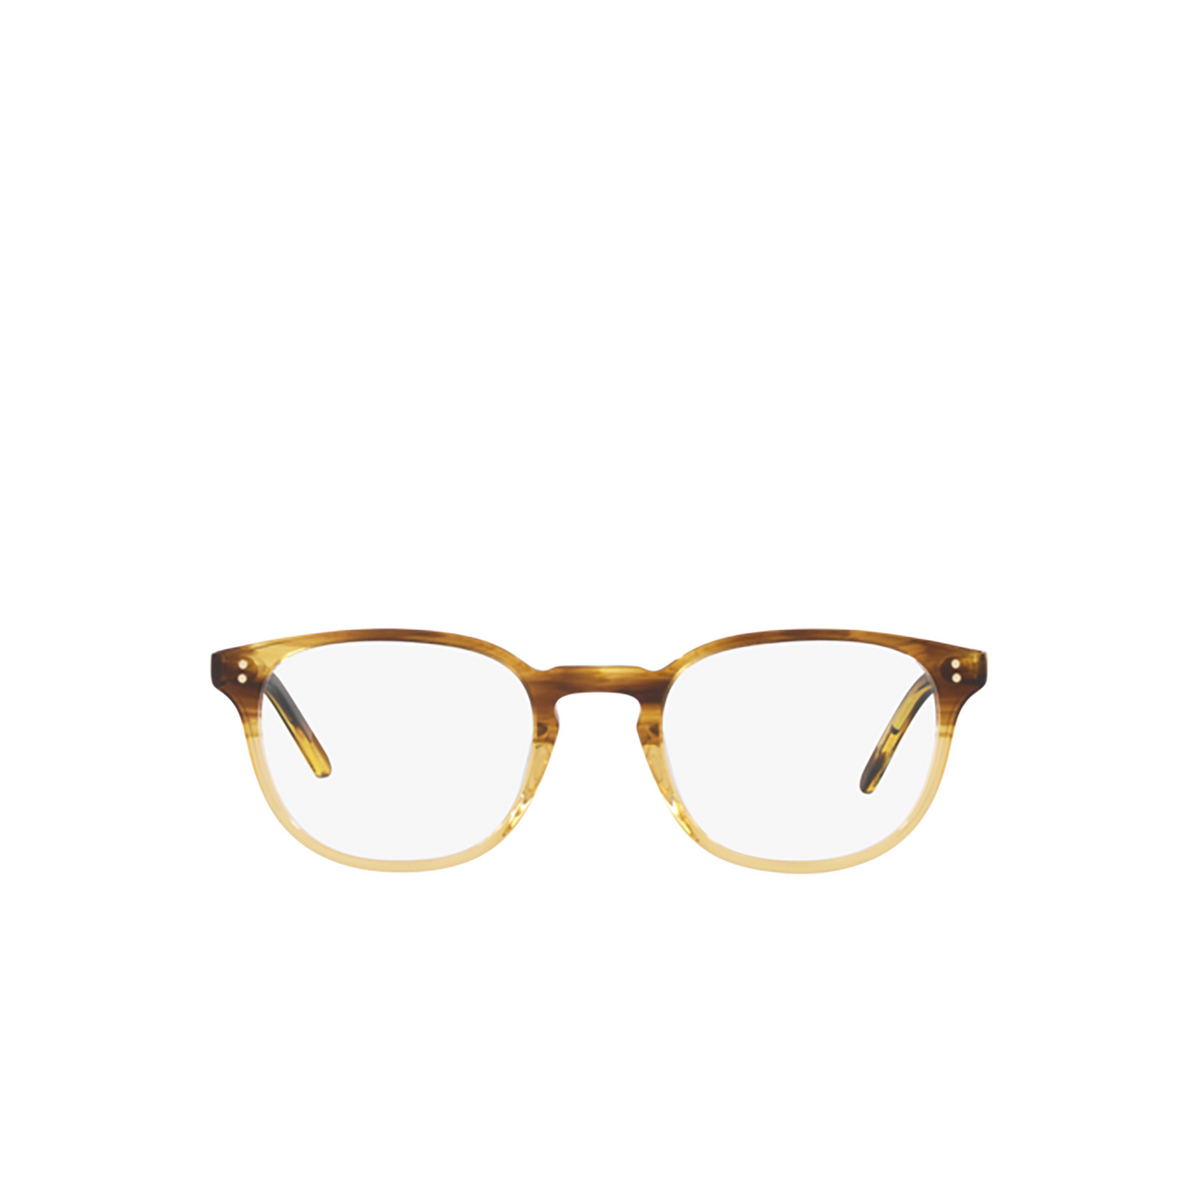 Oliver Peoples FAIRMONT Eyeglasses 1703 Canarywood Gradient - front view